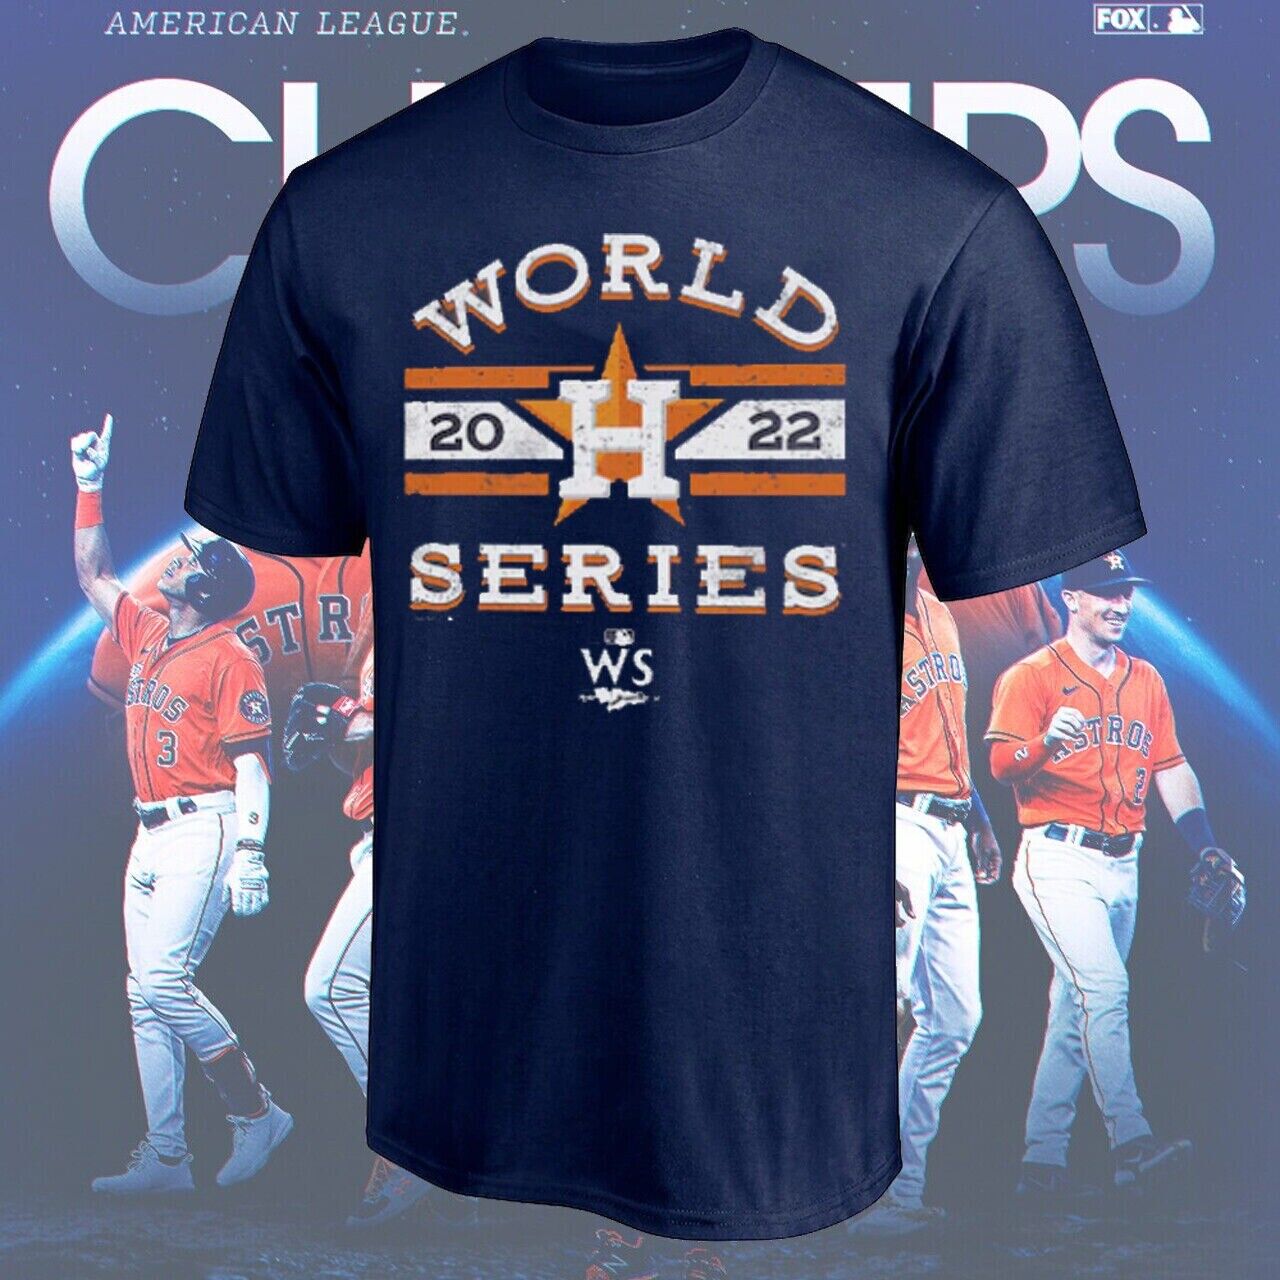 Hot Houston Astros 2022 American League Champions Baseball Team T Shirt Full Size Up To 5xl